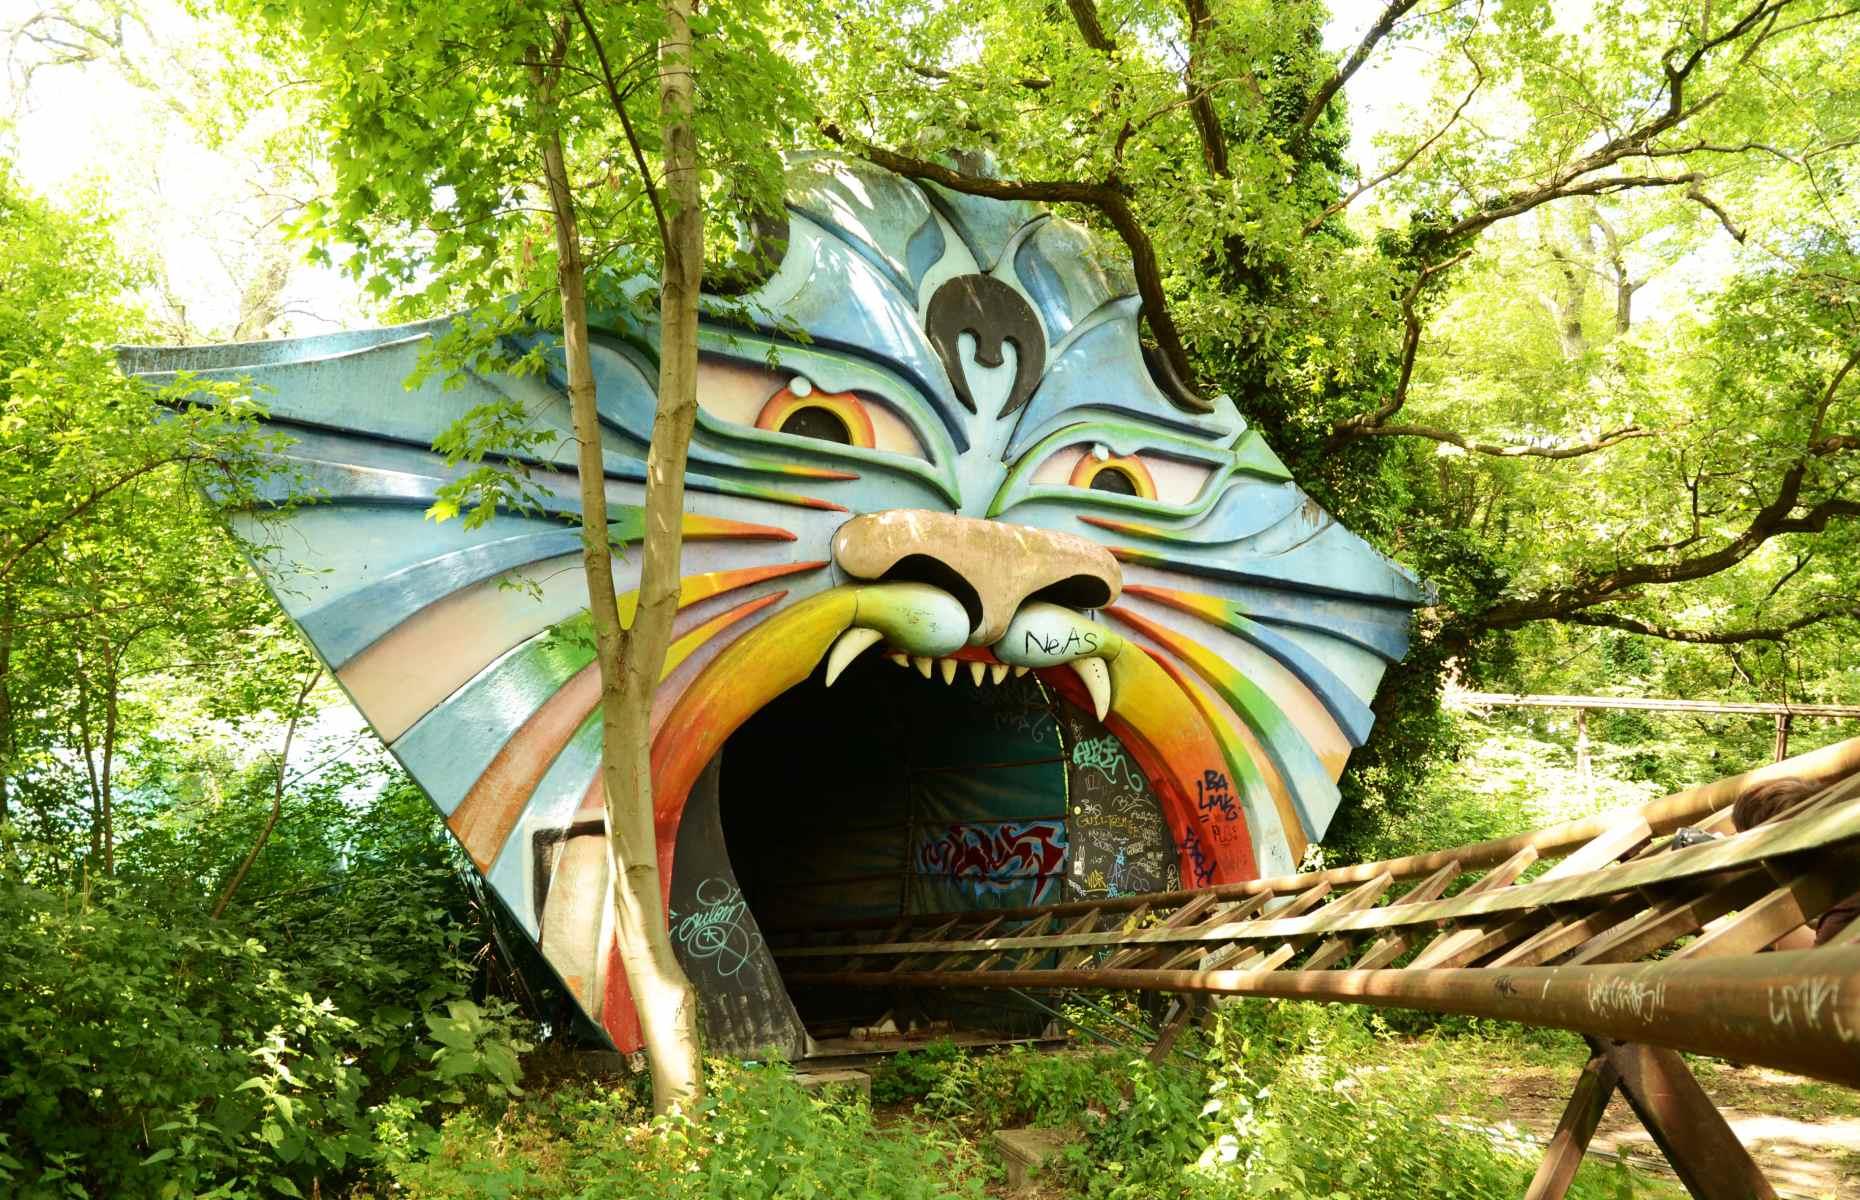 <p><a href="https://www.spreepark.berlin/en/">Spreepark</a>’s fall from grace came in 2002 when it was shuttered after going bust. It became a boneyard of graffiti, rusting roller coasters and forgotten amusements, which was a far cry from its golden days during the Communist era. Back then, the theme park was known as the VEB Kulturpark Plänterwald and saw approximately 1.7 million visitors a year. It is currently being reconceptualized and is set to reopen as a new public art, culture and nature park in 2026. Original Spreepark features like the Ferris wheel will be retained, yet repurposed.</p>  <p><a href="https://www.loveexploring.com/gallerylist/68365/eerie-abandoned-amusement-parks-around-the-world"><strong>Discover the eerie abandoned amusement parks around the world</strong></a></p>